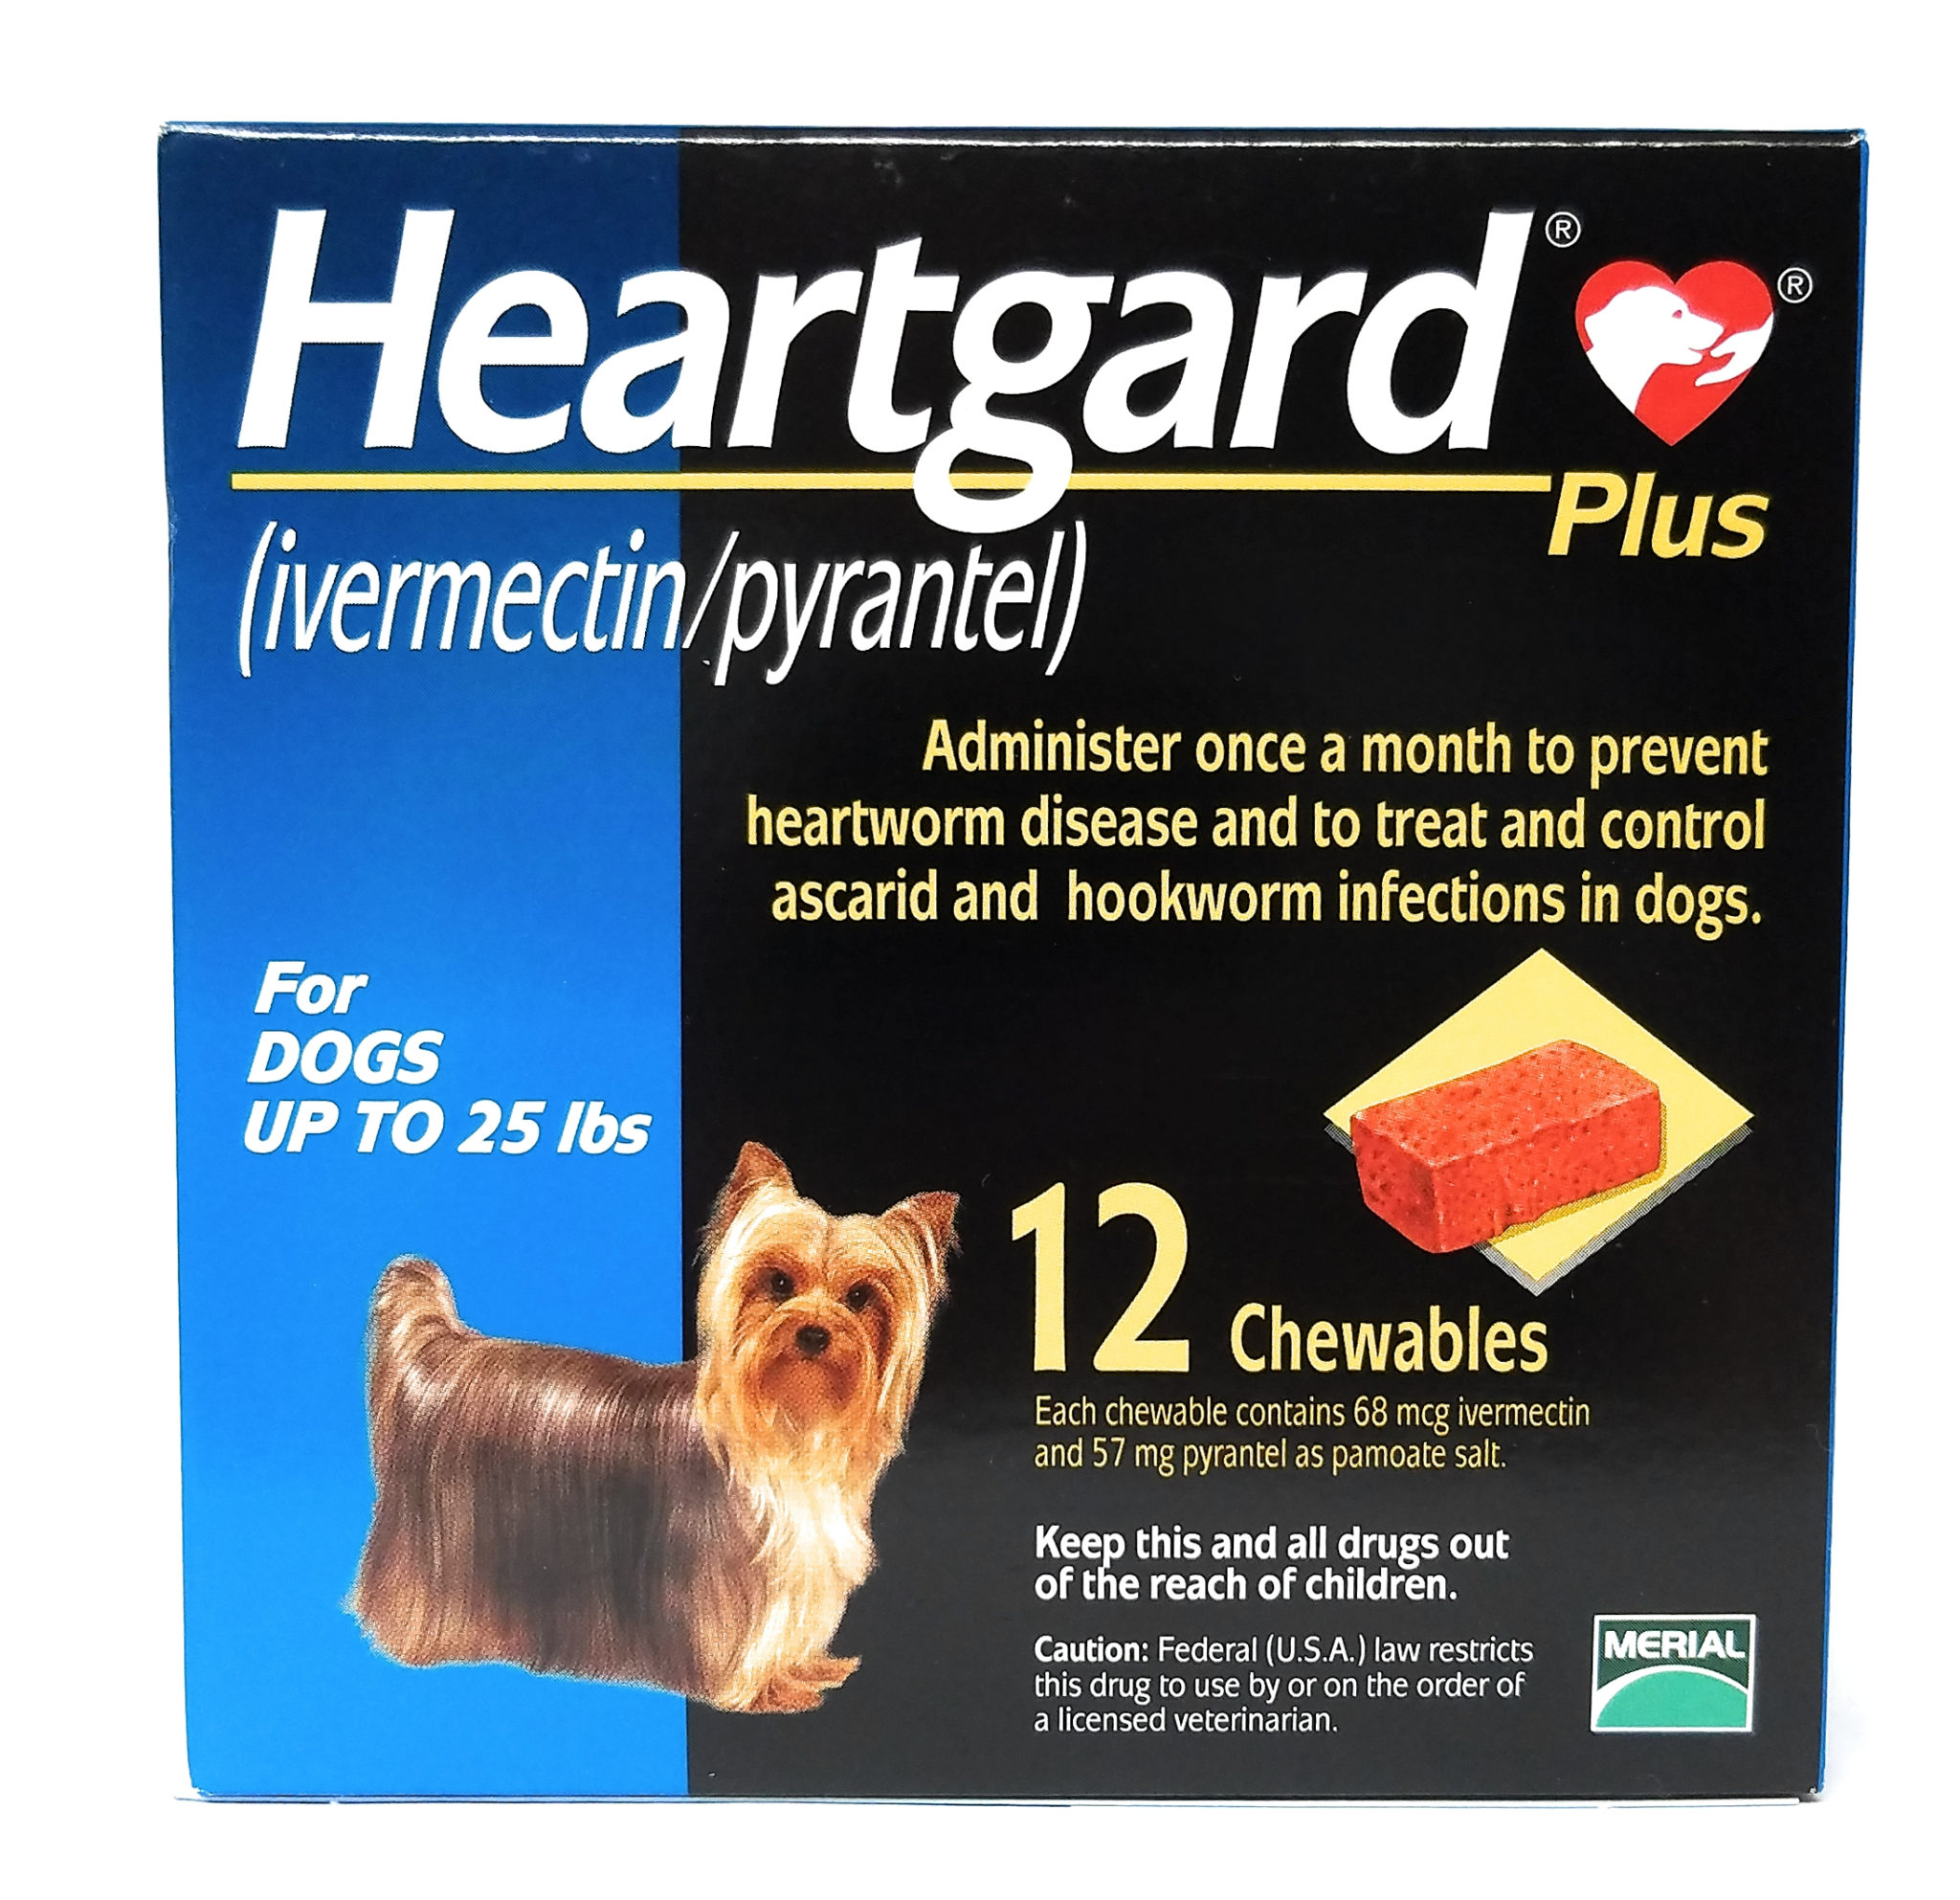 vet-approved-rx-heartgard-plus-for-dogs-up-to-25-lbs-12-doses